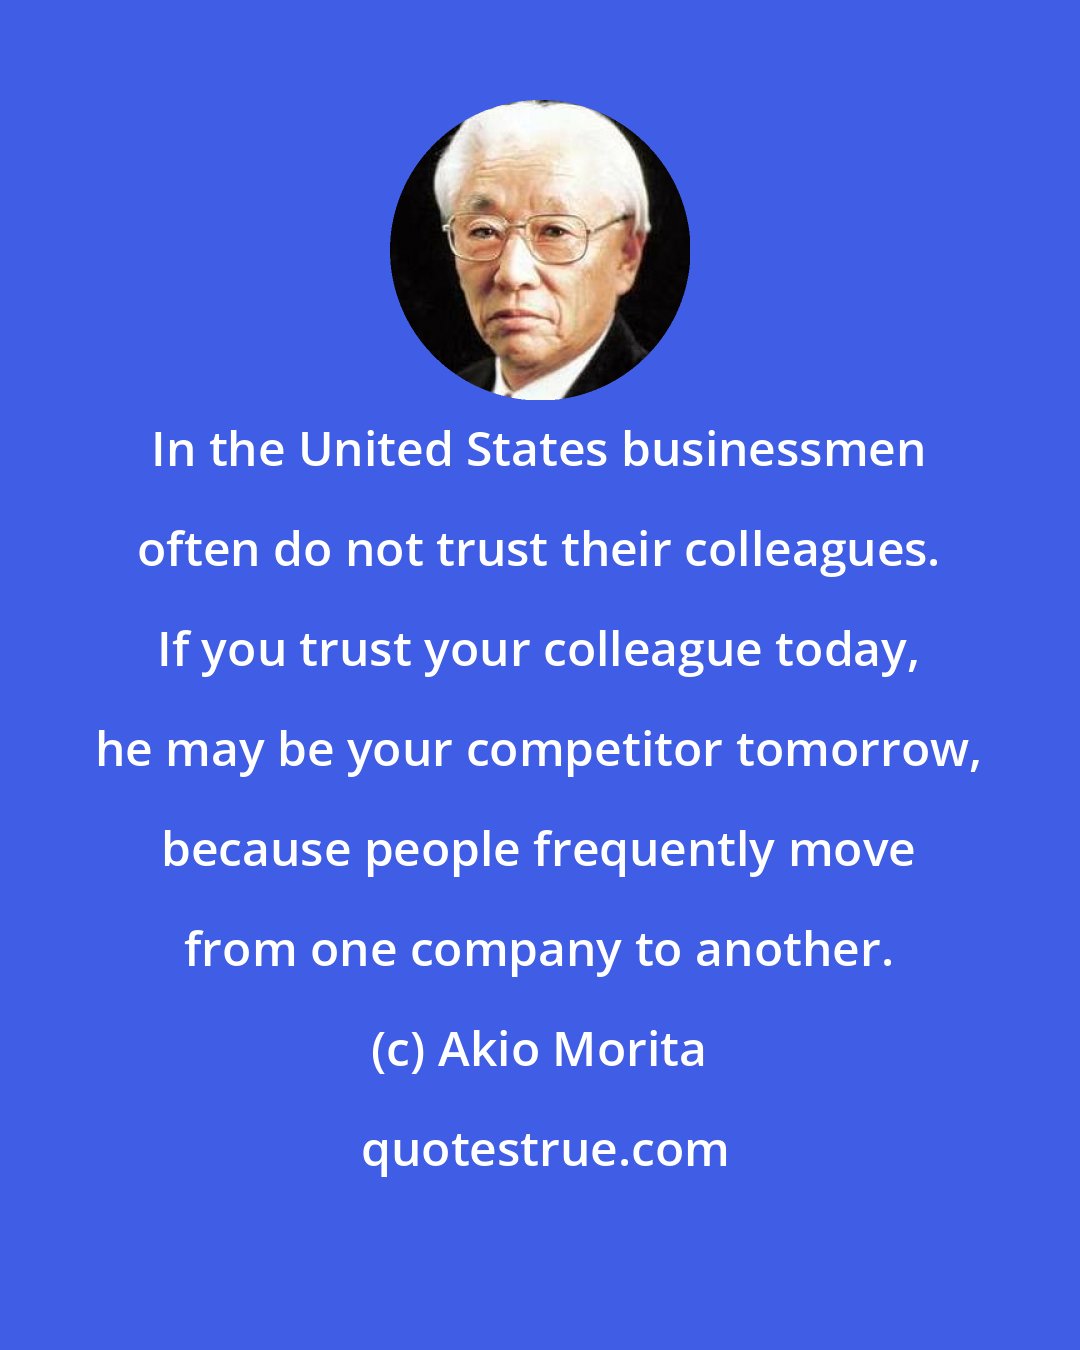 Akio Morita: In the United States businessmen often do not trust their colleagues. If you trust your colleague today, he may be your competitor tomorrow, because people frequently move from one company to another.